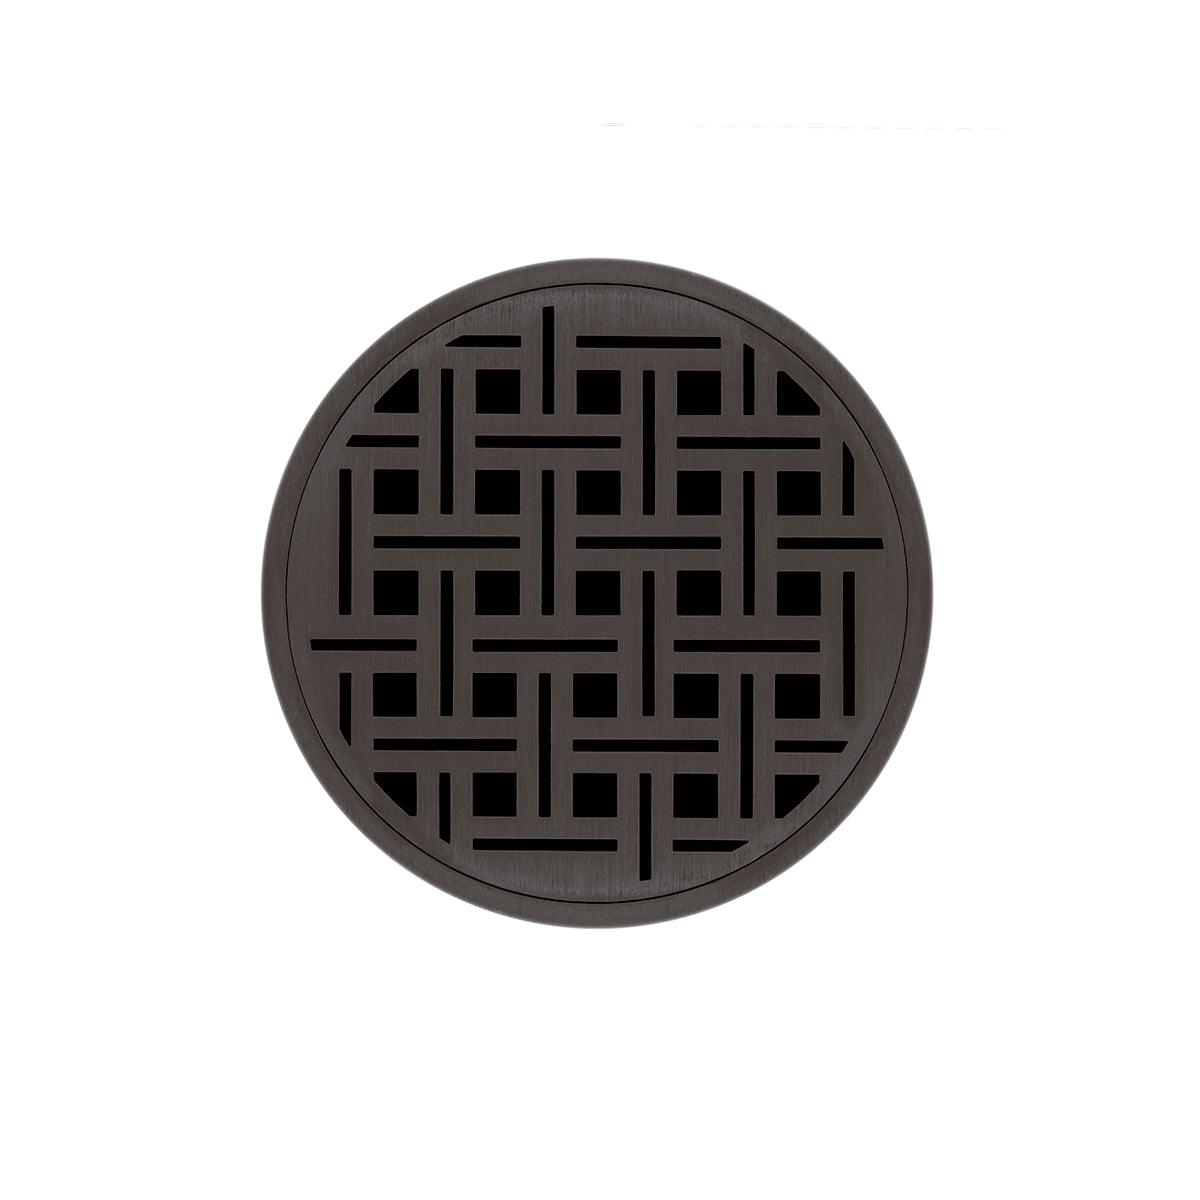 Infinity Drain 5" Round RVD 5 Premium Center Drain Kit with Weave Pattern Decorative Plate with Cast Iron Drain Body for Hot Mop, 2" Outlet